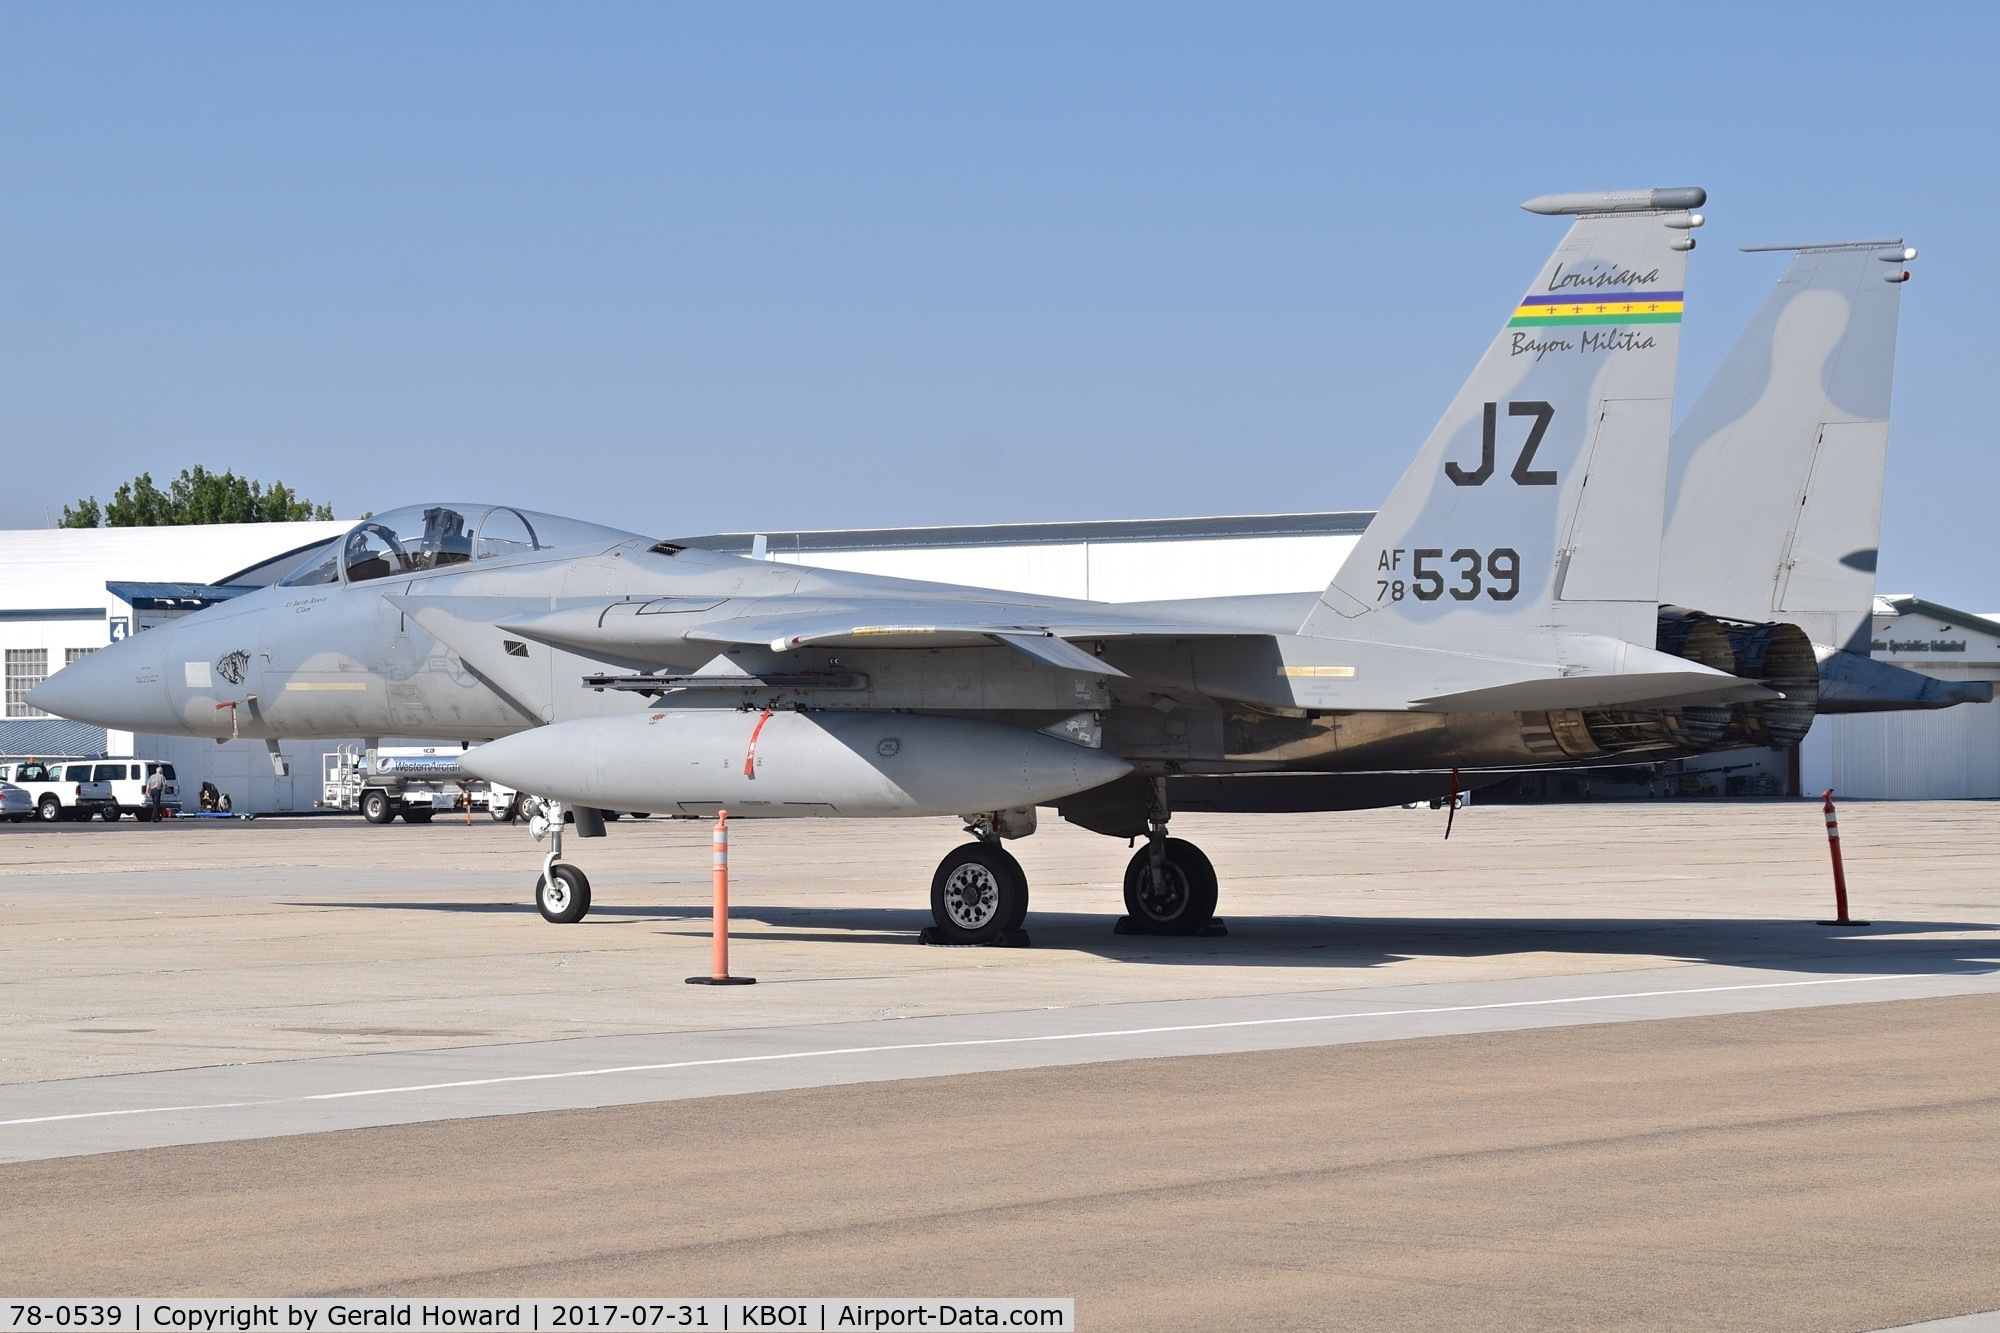 78-0539, 1978 McDonnell Douglas F-15C Eagle C/N 0529/C072, 159th Fighter Wing 